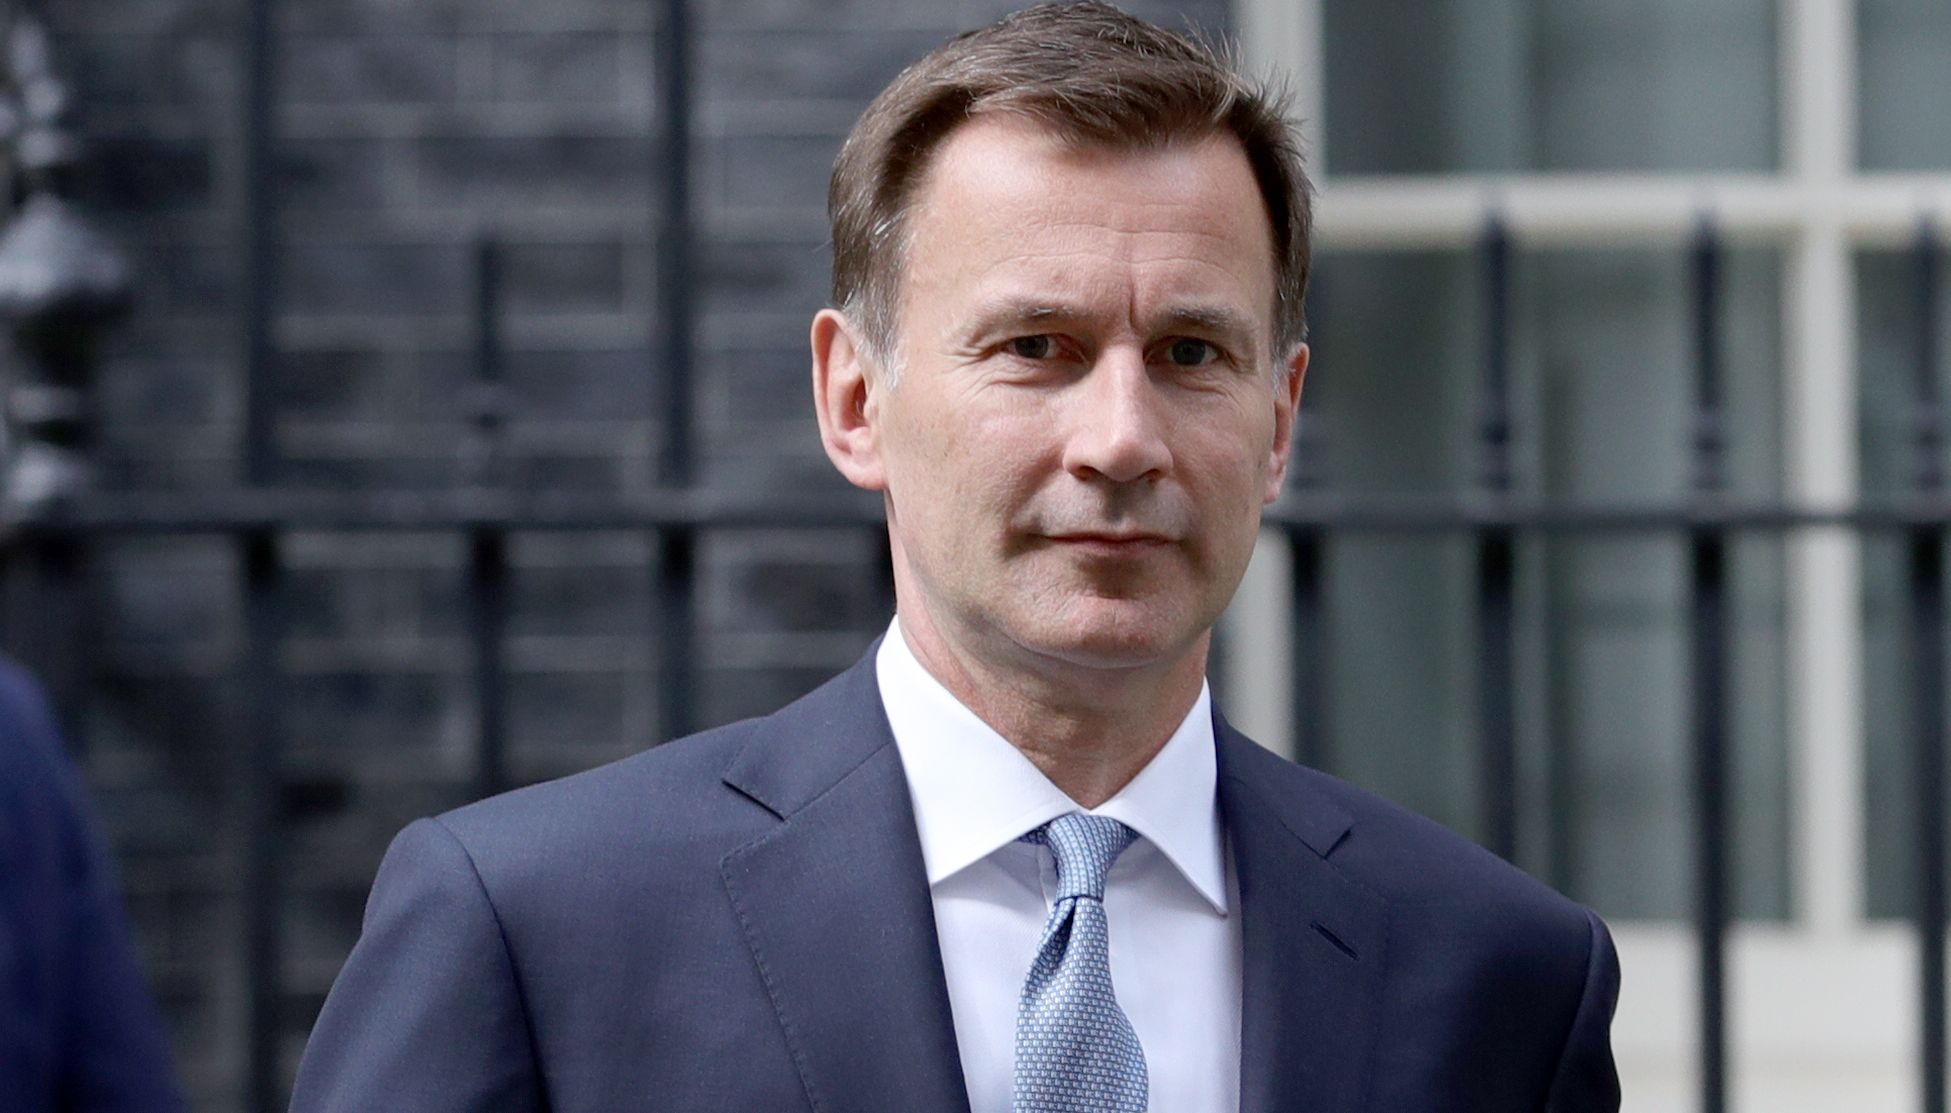 Sajid Javid and Jeremy Hunt announce separate Conservative leadership bids